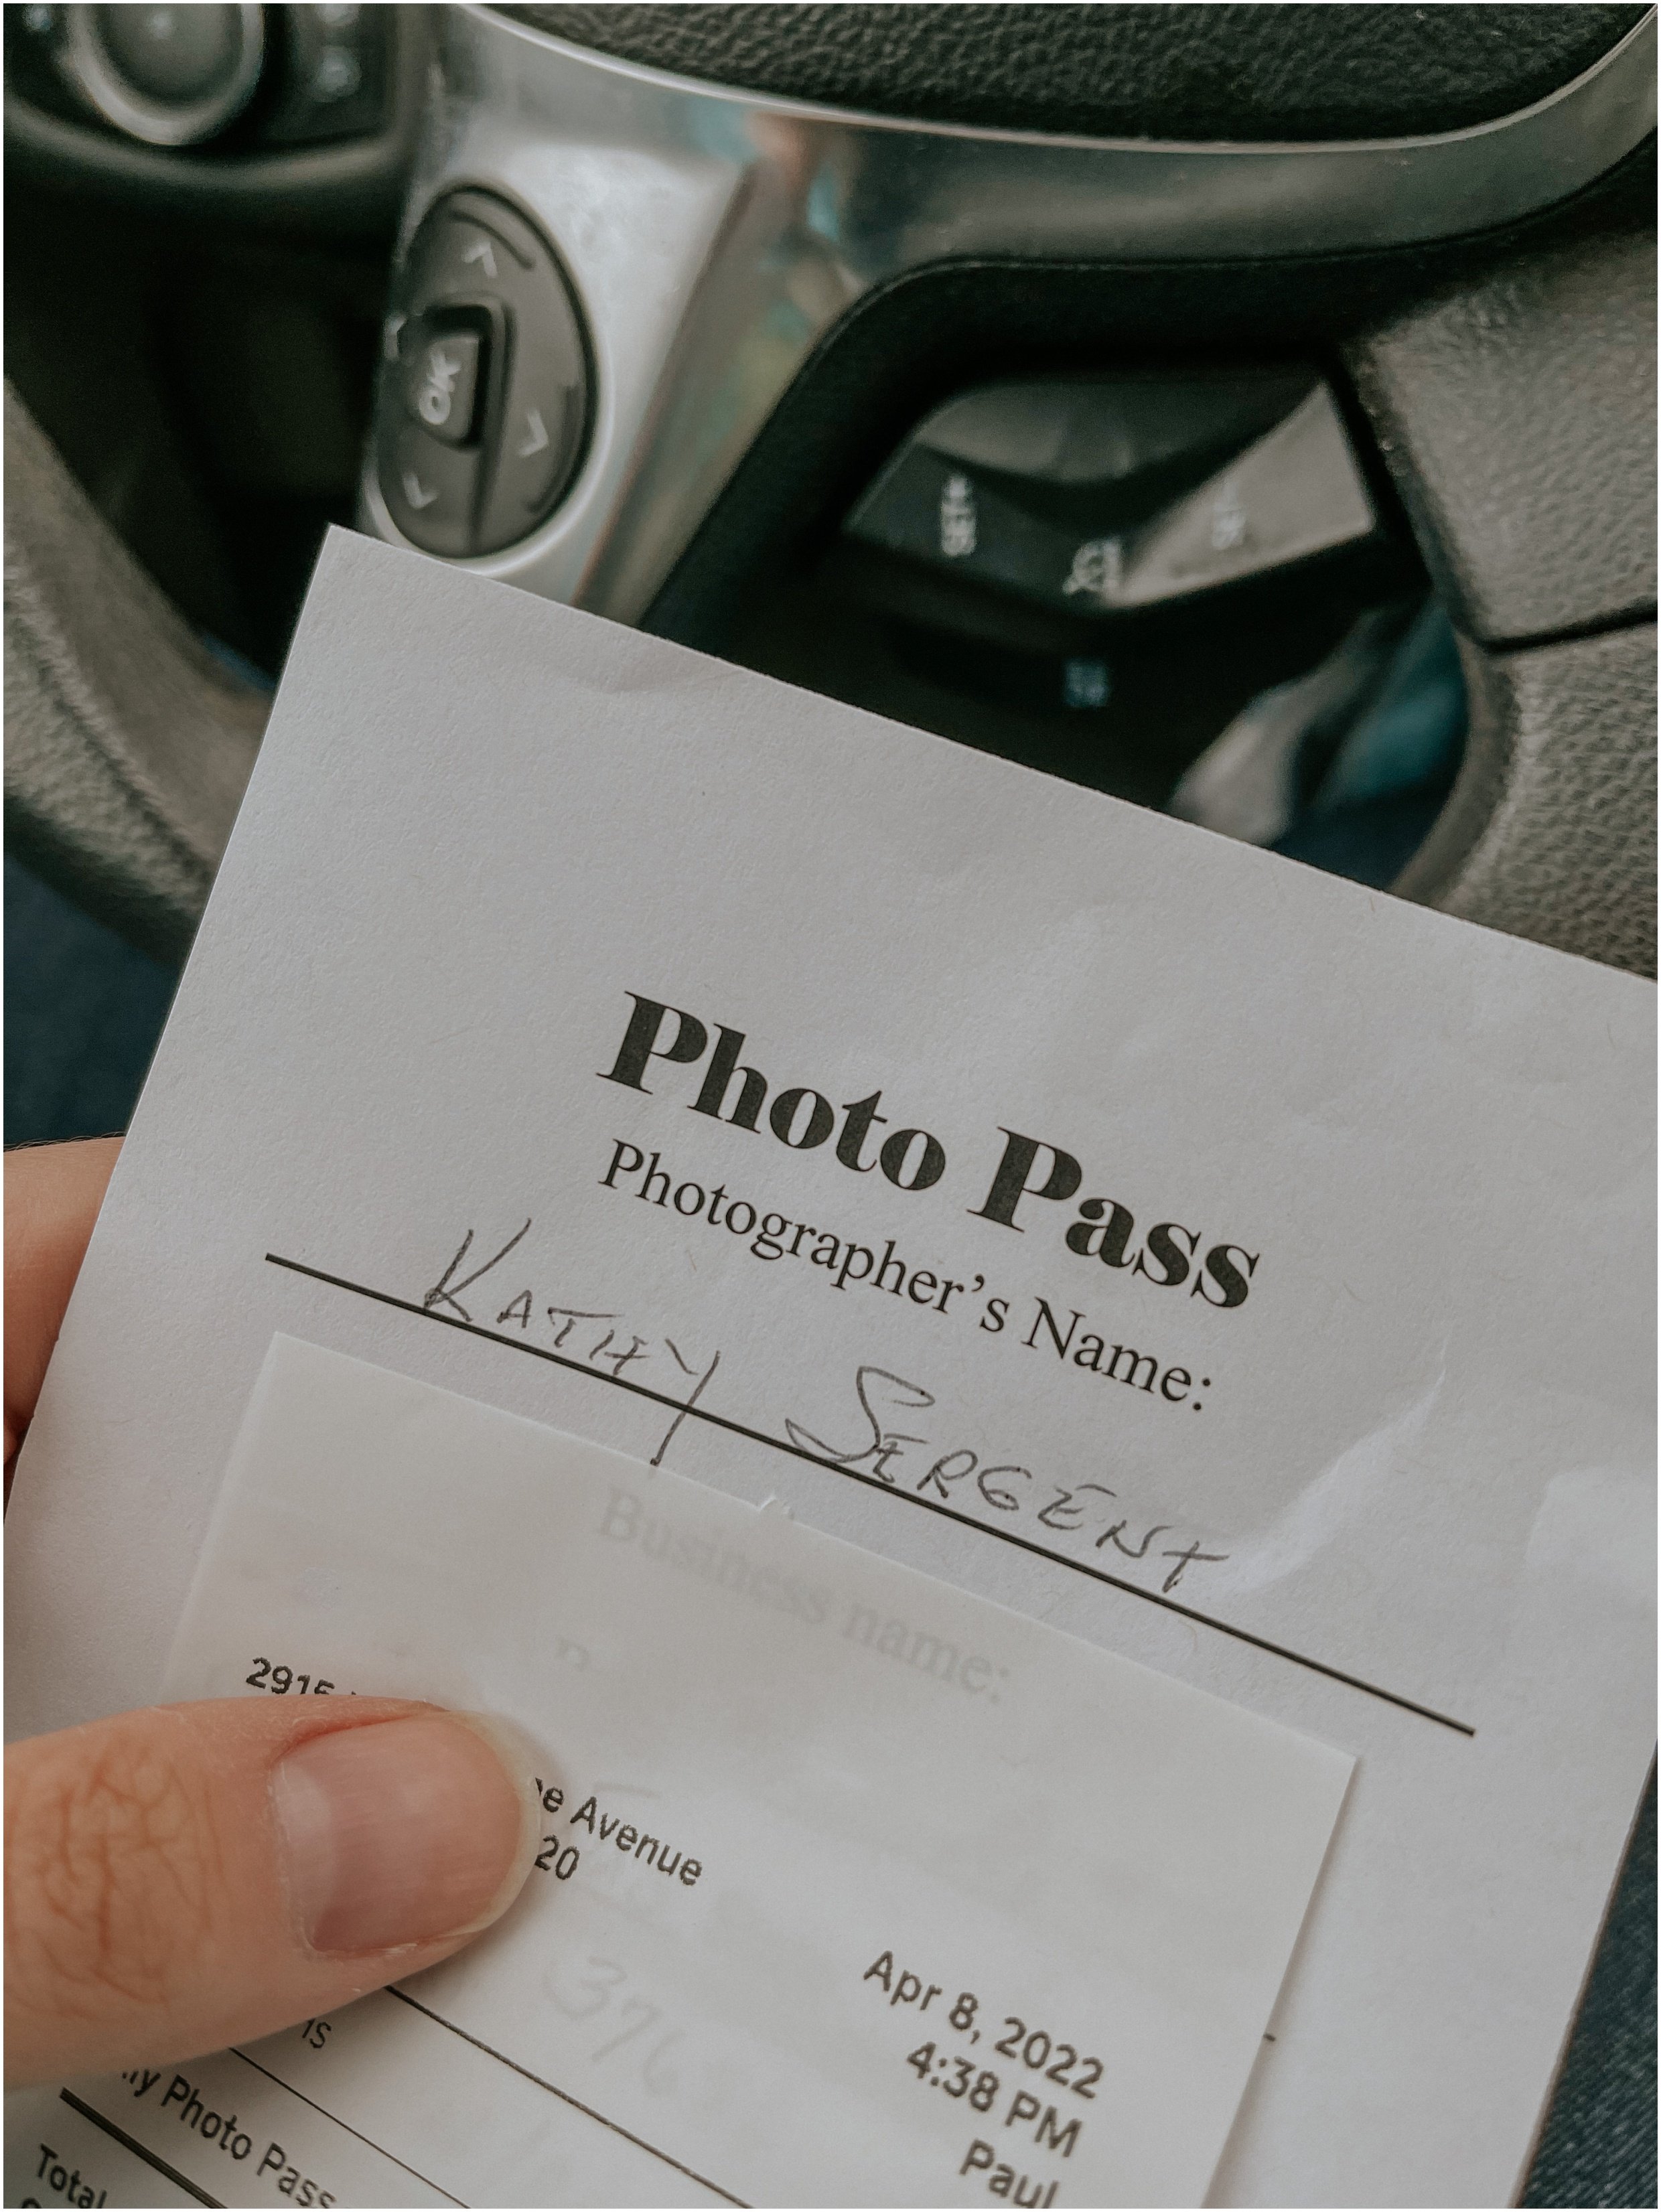 Had a session in Knoxville and had to get a permit-- I'm forever "Kathy," haha! (No shade to any Kathy's out there, it's just not me, I'm definitely a "Katy"!)